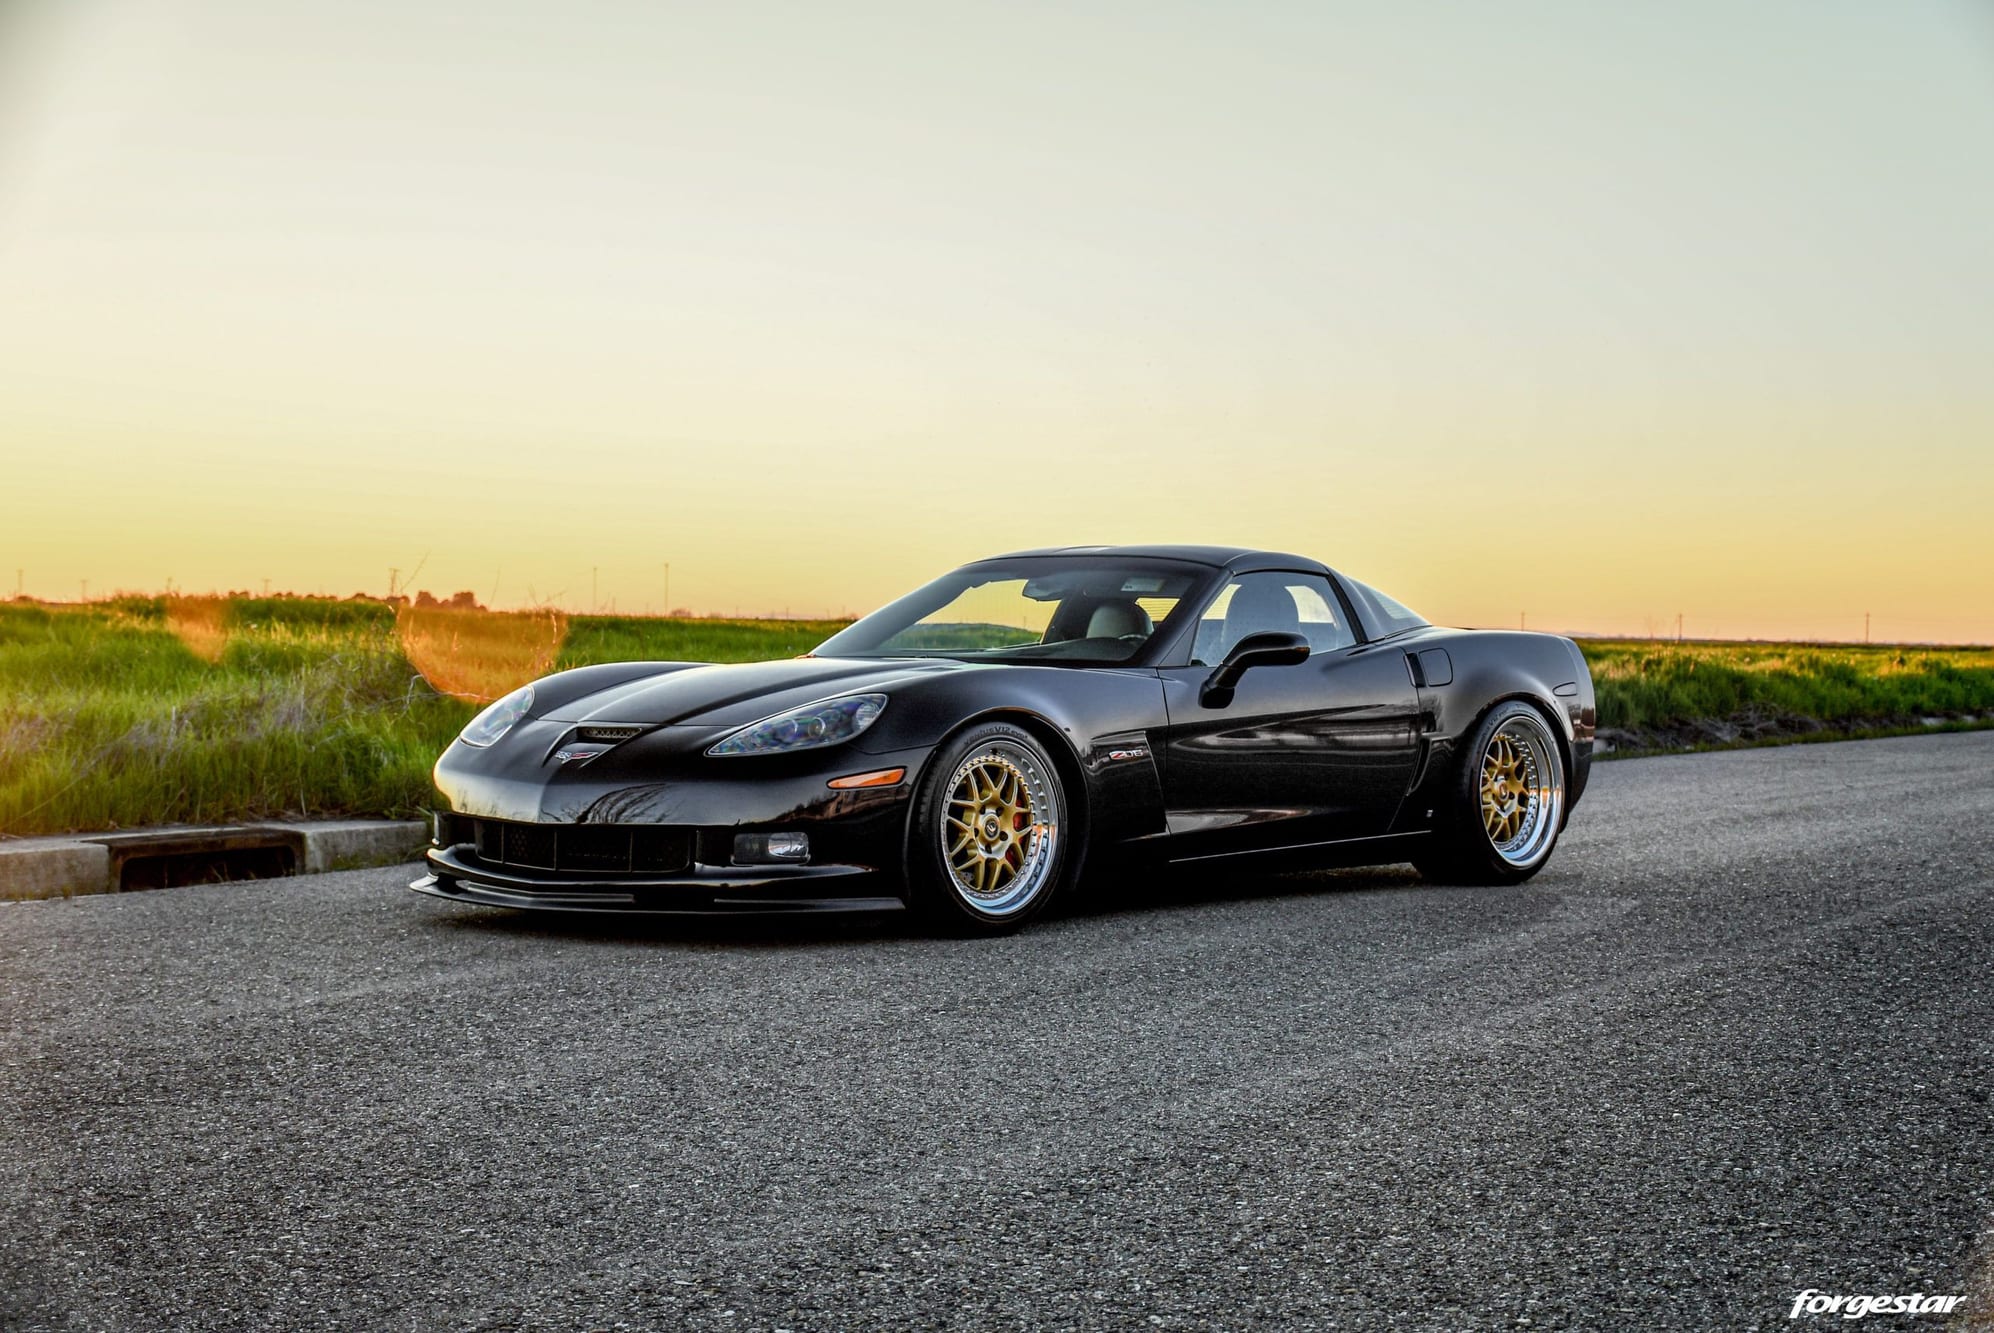 Forgestar Wheels offers a great wide selection on fitments for the Corvette C7 Grandsport...